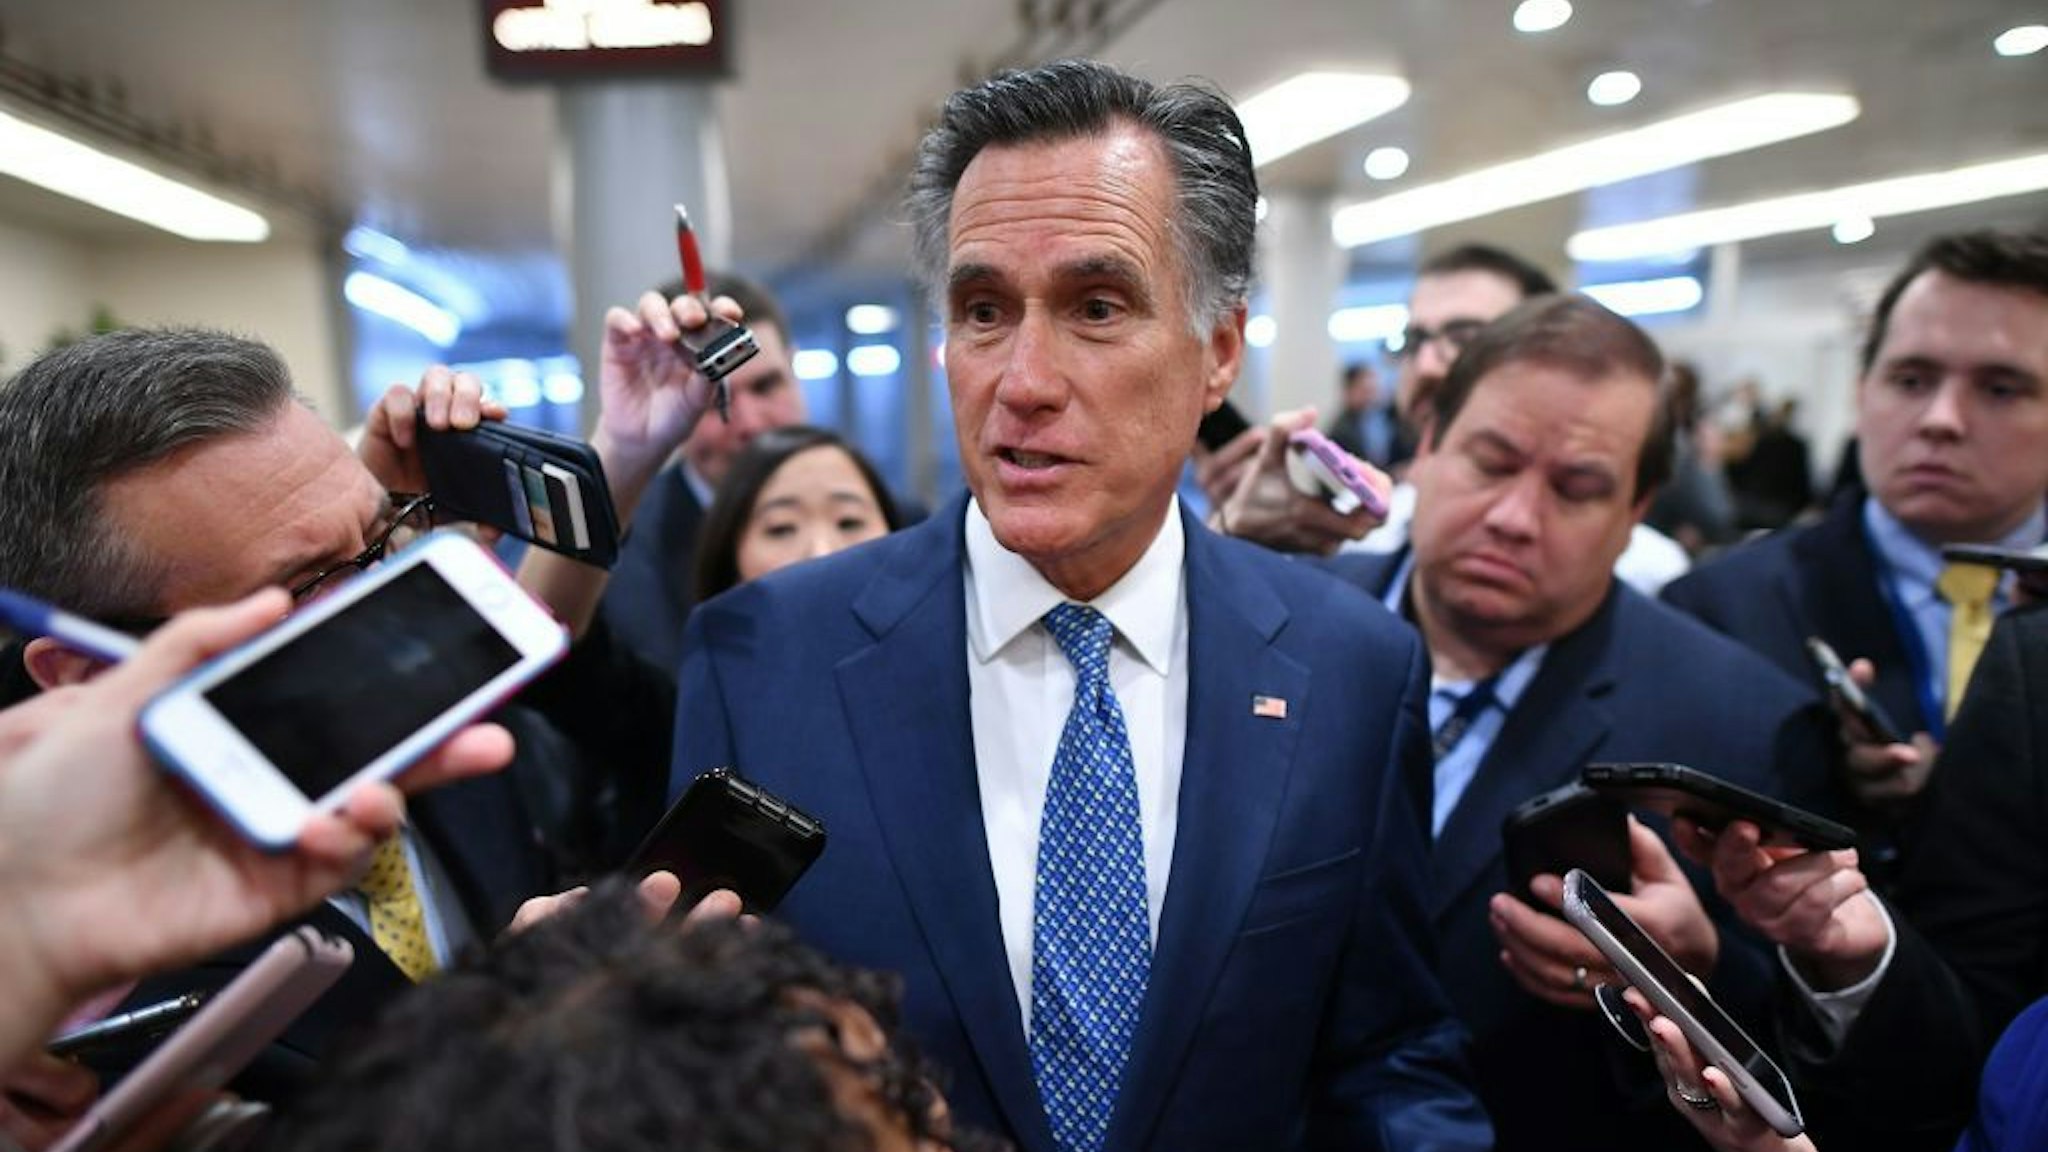 Senator Mitt Romney(R-UT)speaks to the media as he arrives during the impeachment trial of US President Donald Trump on Capitol Hill January 29, 2020, in Washington, DC. - The fight over calling witnesses to testify in President Donald Trump's impeachment trial intensified January 28, 2020 after Trump's lawyers closed their defense calling the abuse of power charges against him politically motivated. Democrats sought to have the Senate subpoena former White House national security advisor John Bolton to provide evidence after leaks from his forthcoming book suggested he could supply damning evidence against Trump. . (Photo by Mandel NGAN / AFP)